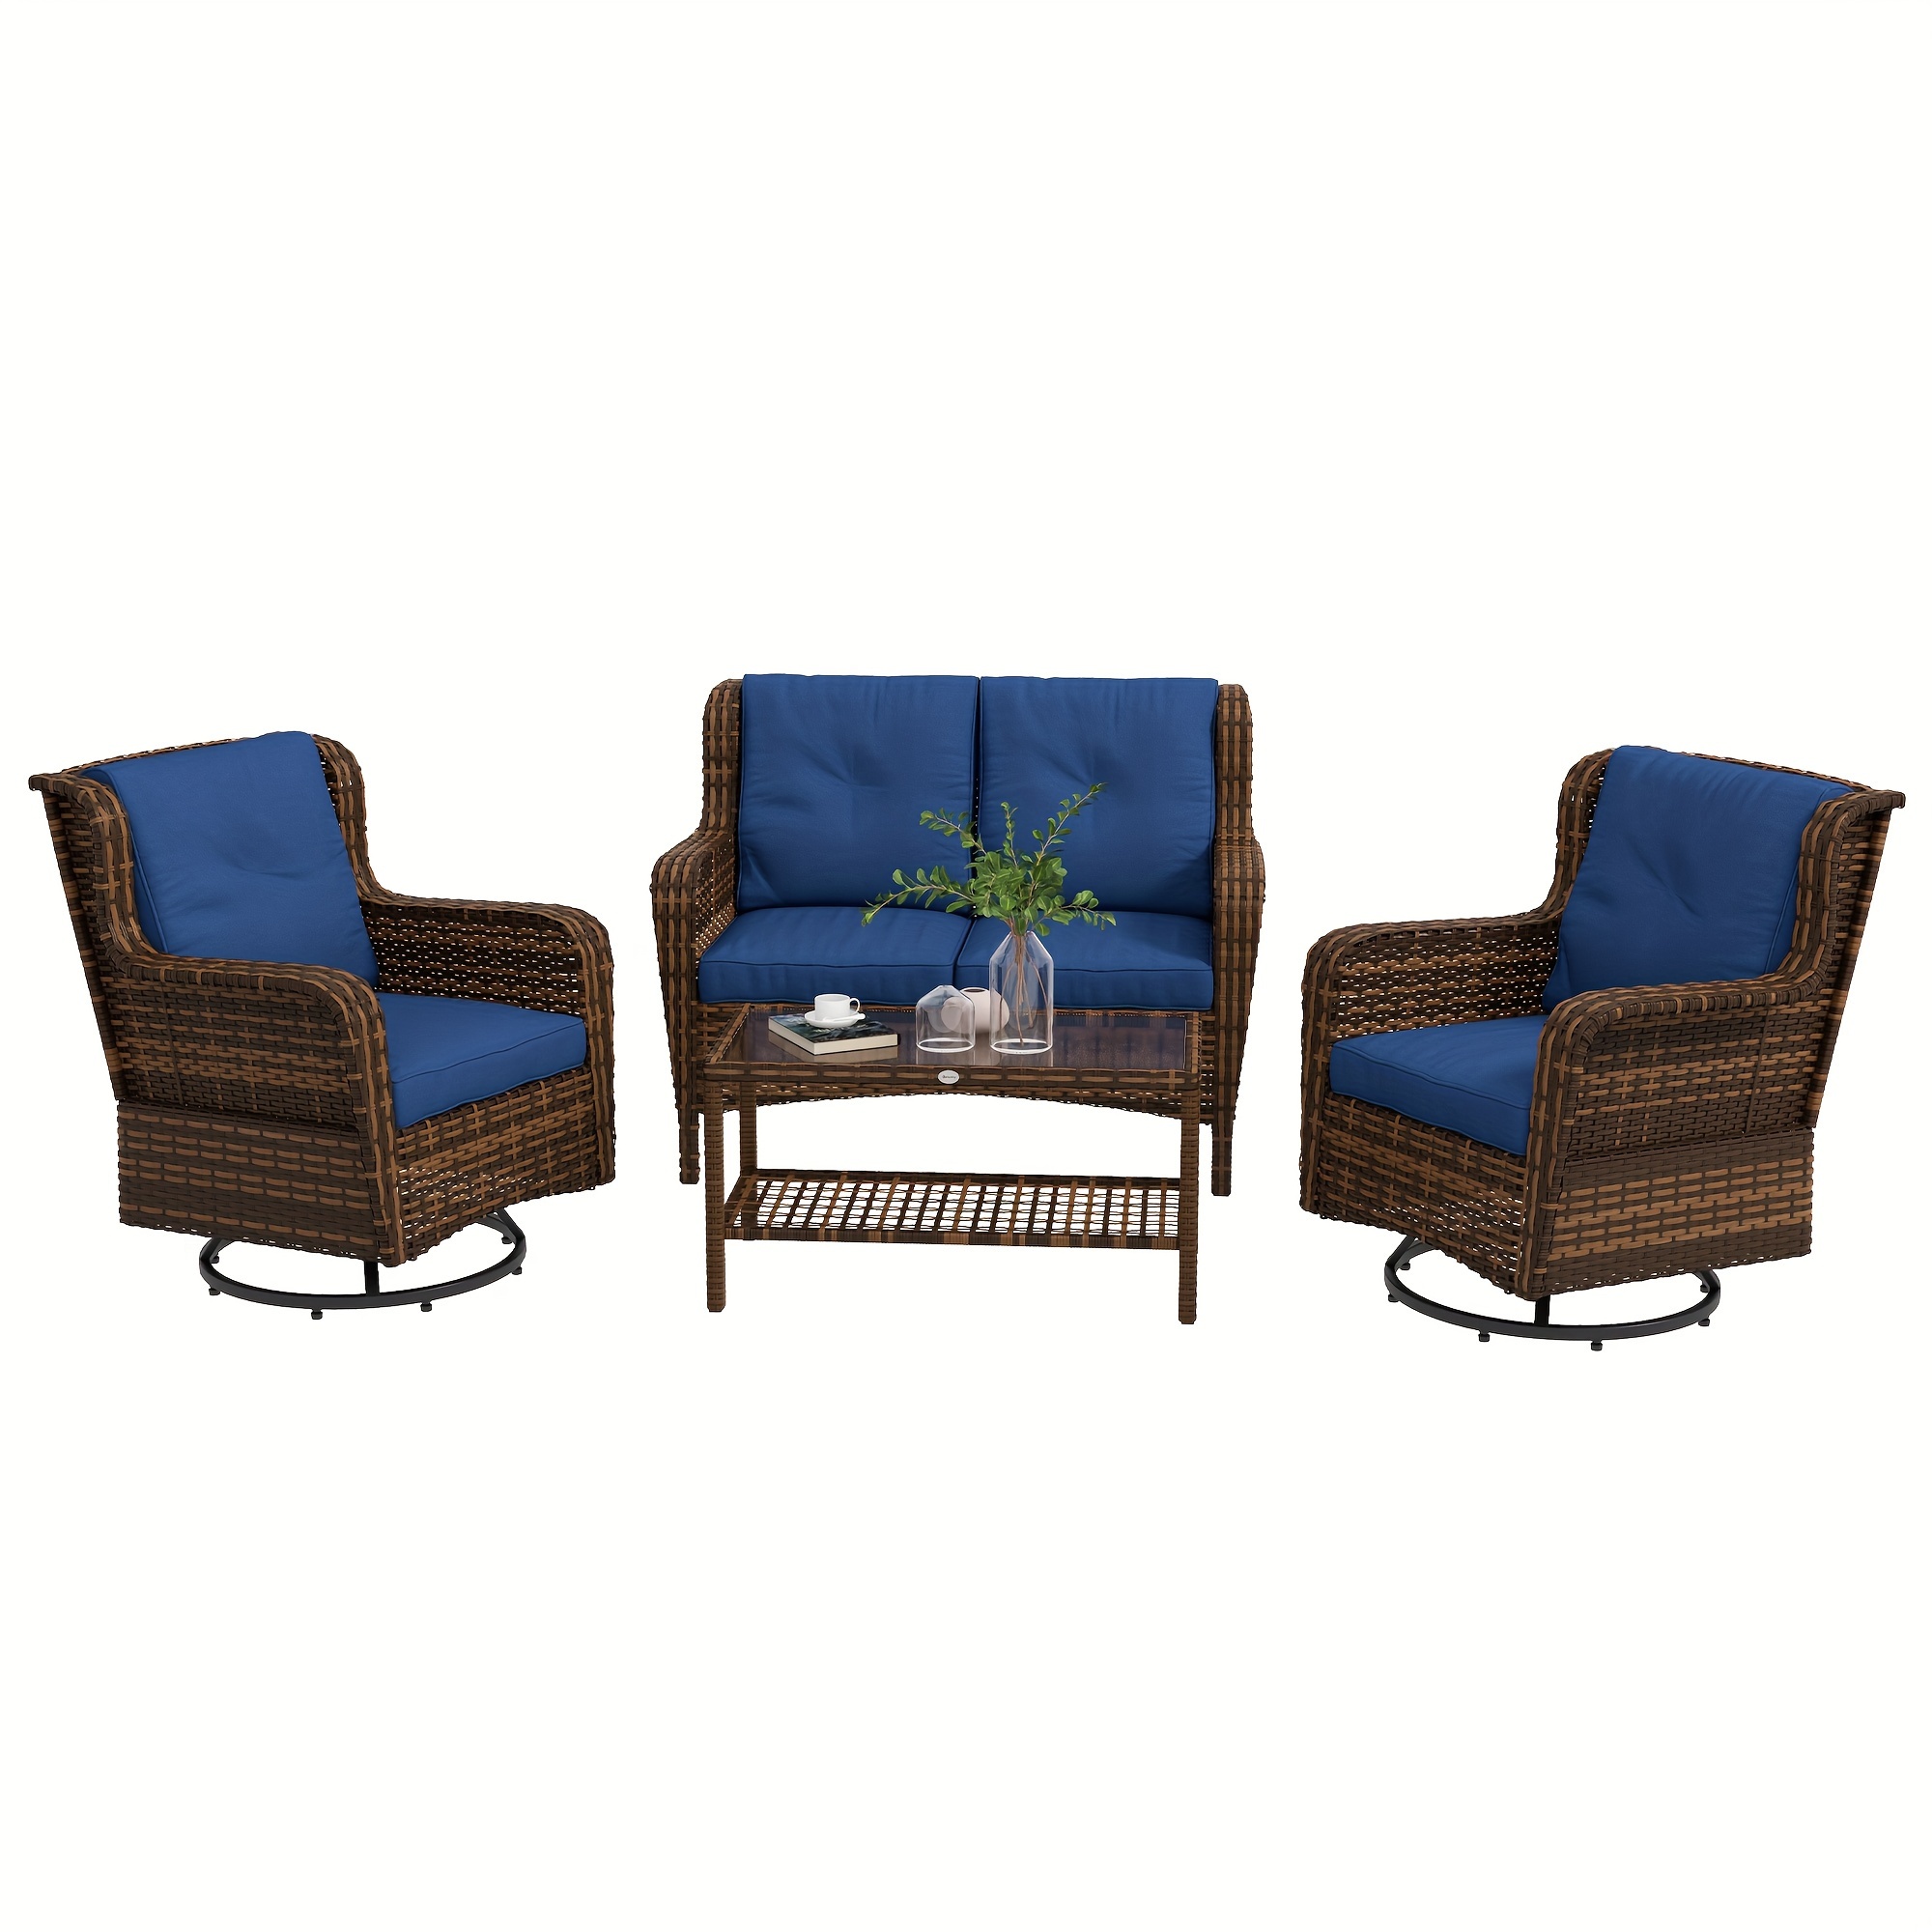 

Outsunny 4 Piece Pe Rattan Outdoor Patio Furniture Set, Wicker Conversation Set With 2 Swivel Rocking Chairs, 2-tier Glass Table And Loveseat For Garden, Patio, Poolside